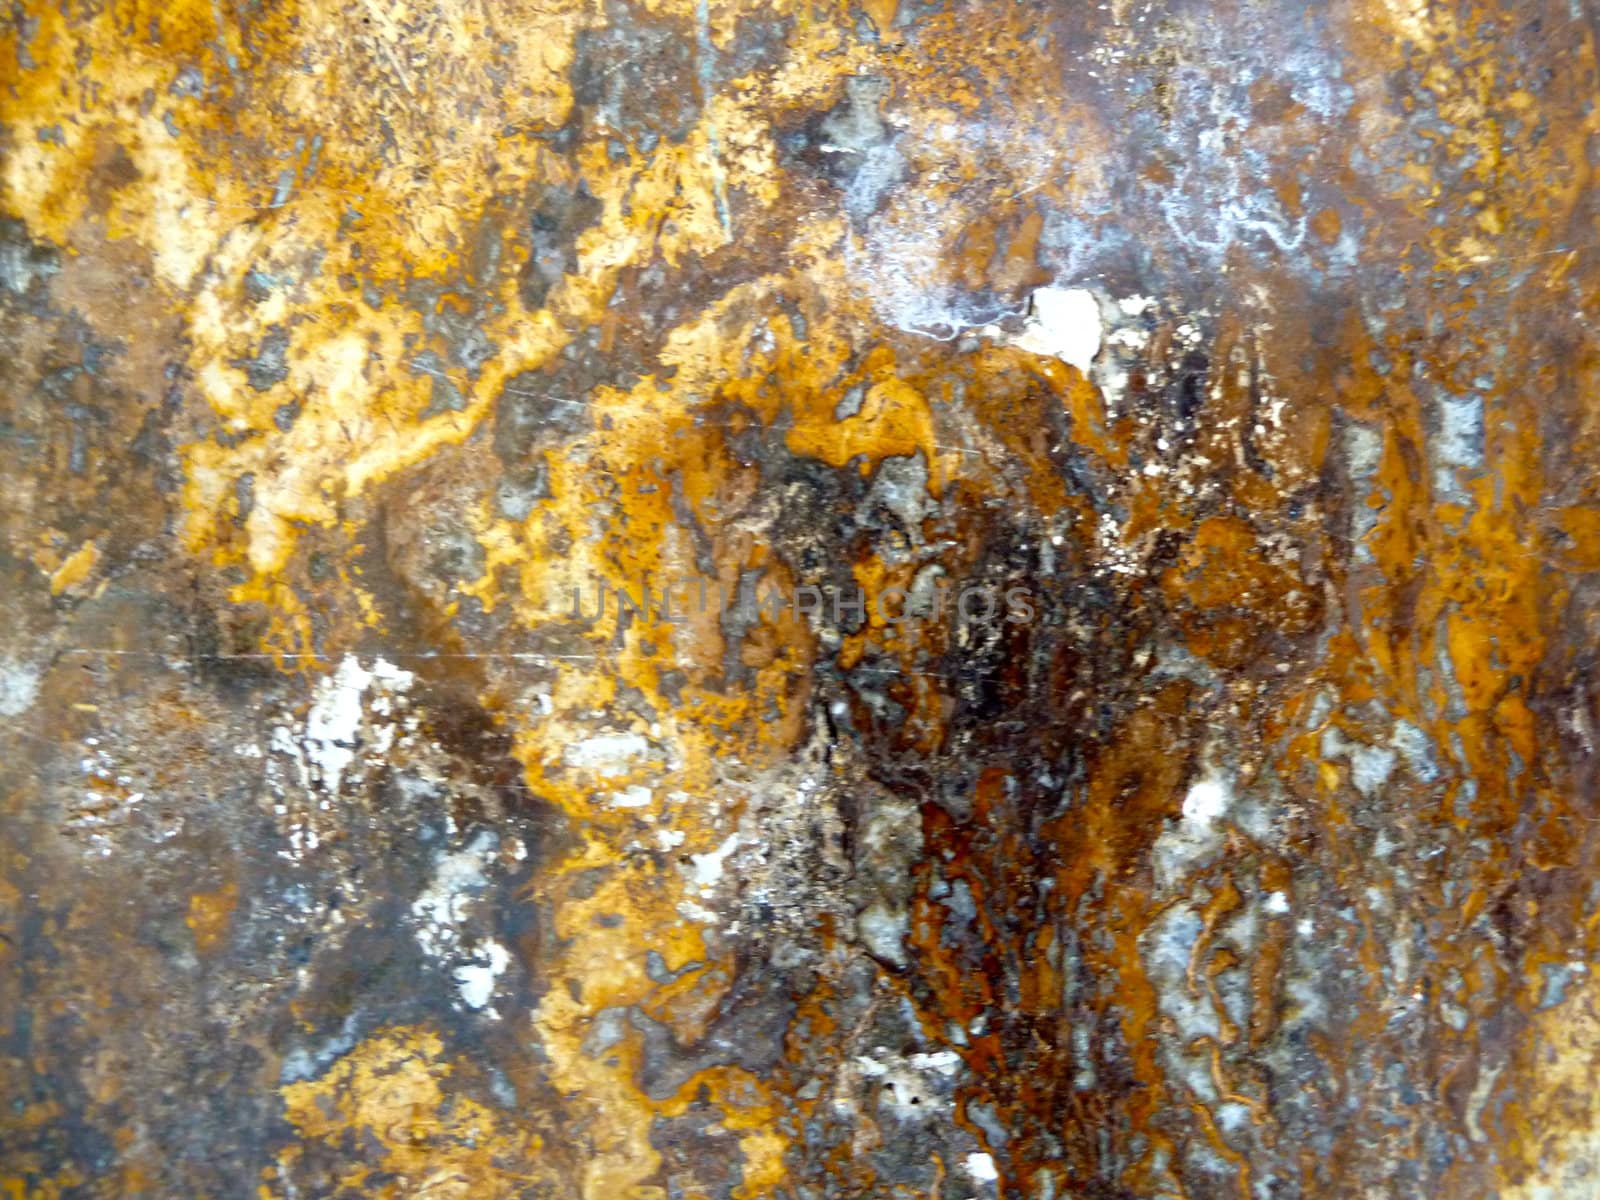 gold coloring on a stone surface